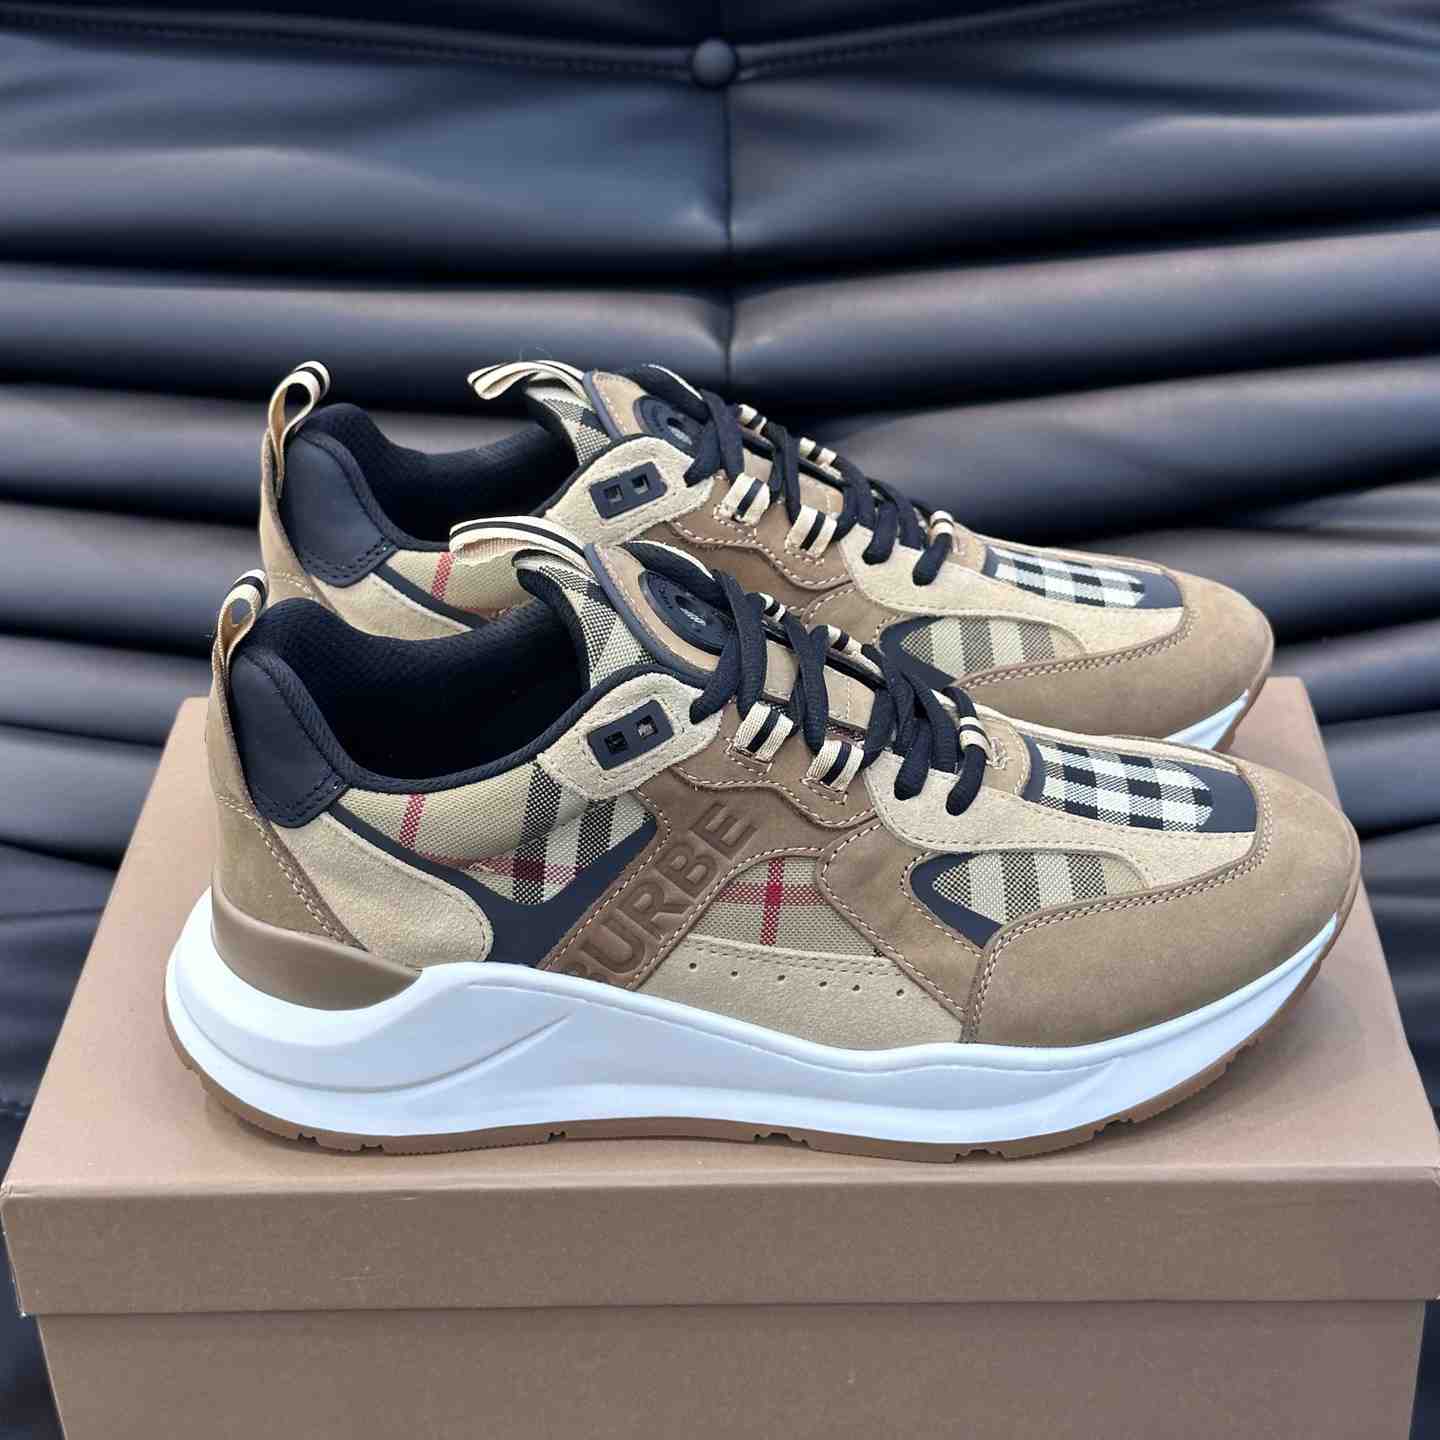 Burberry Beige Leather And Check Print Trainer - DesignerGu